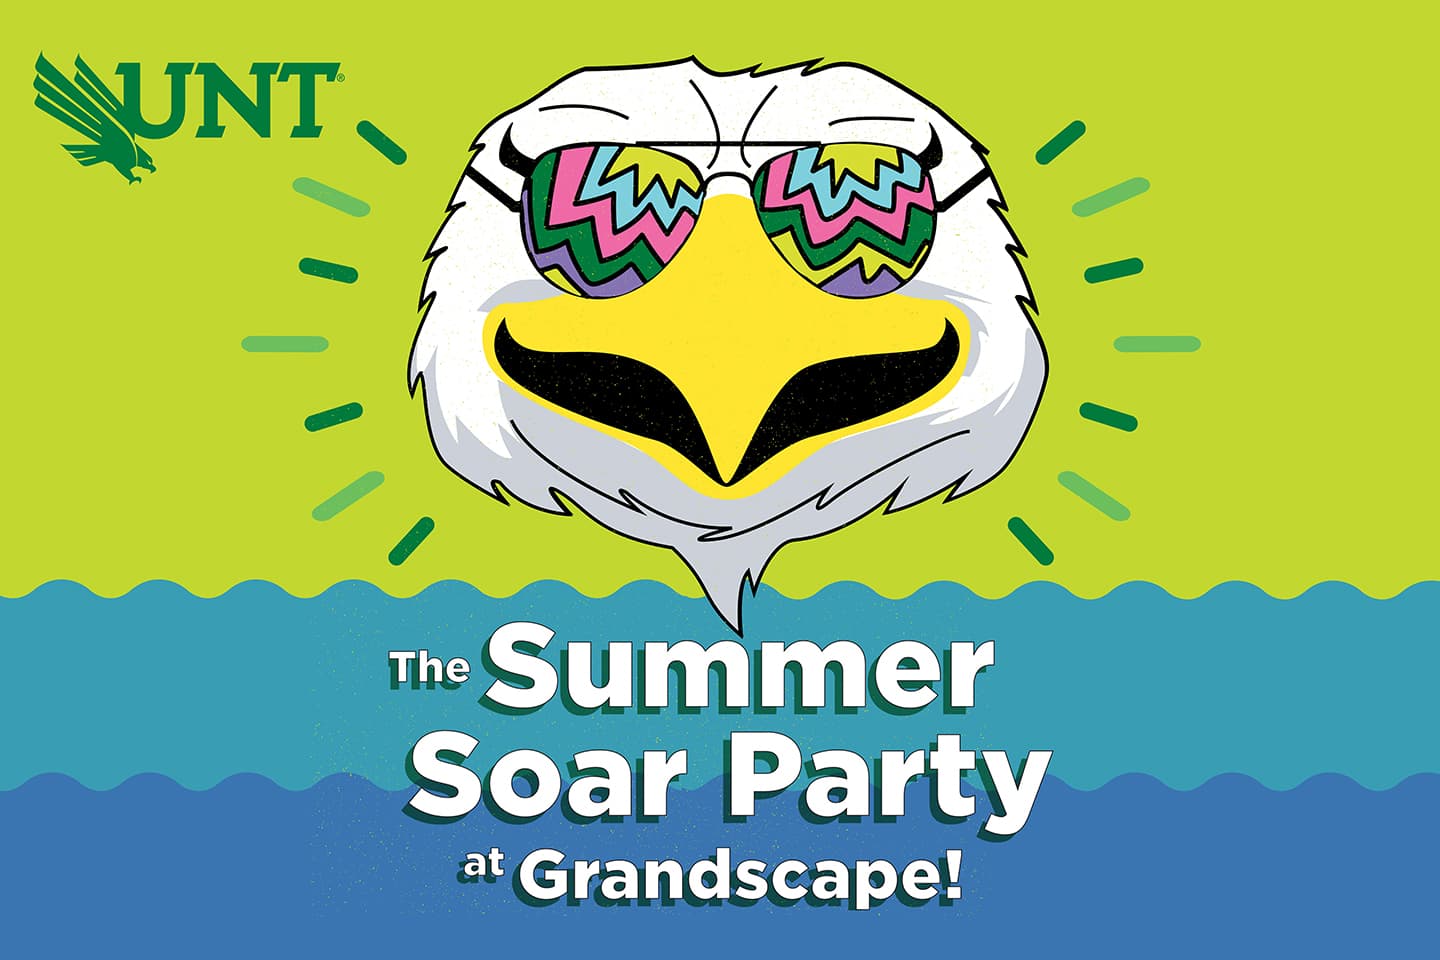 The Summer Soar Party at Grandscape artwork with Scrappy the Eagle mascot in a pool scene wearing funky sunglasses.